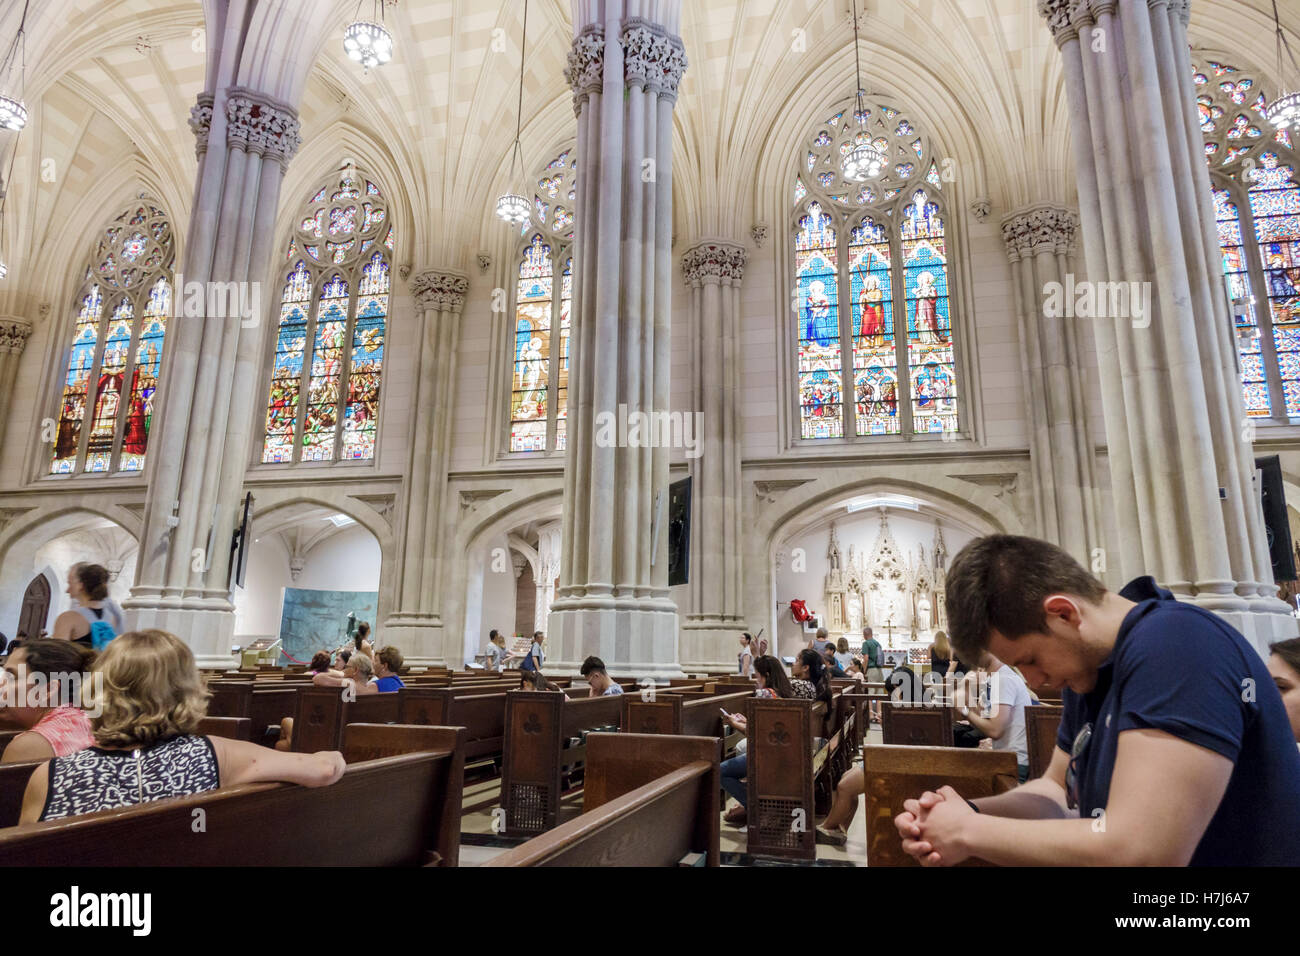 New York City,NY NYC Manhattan,Midtown,Fifth Avenue,St. Patrick's Cathedral,Catholic church,interior inside,Neo-Gothic,nave,stained glass window,pews, Stock Photo